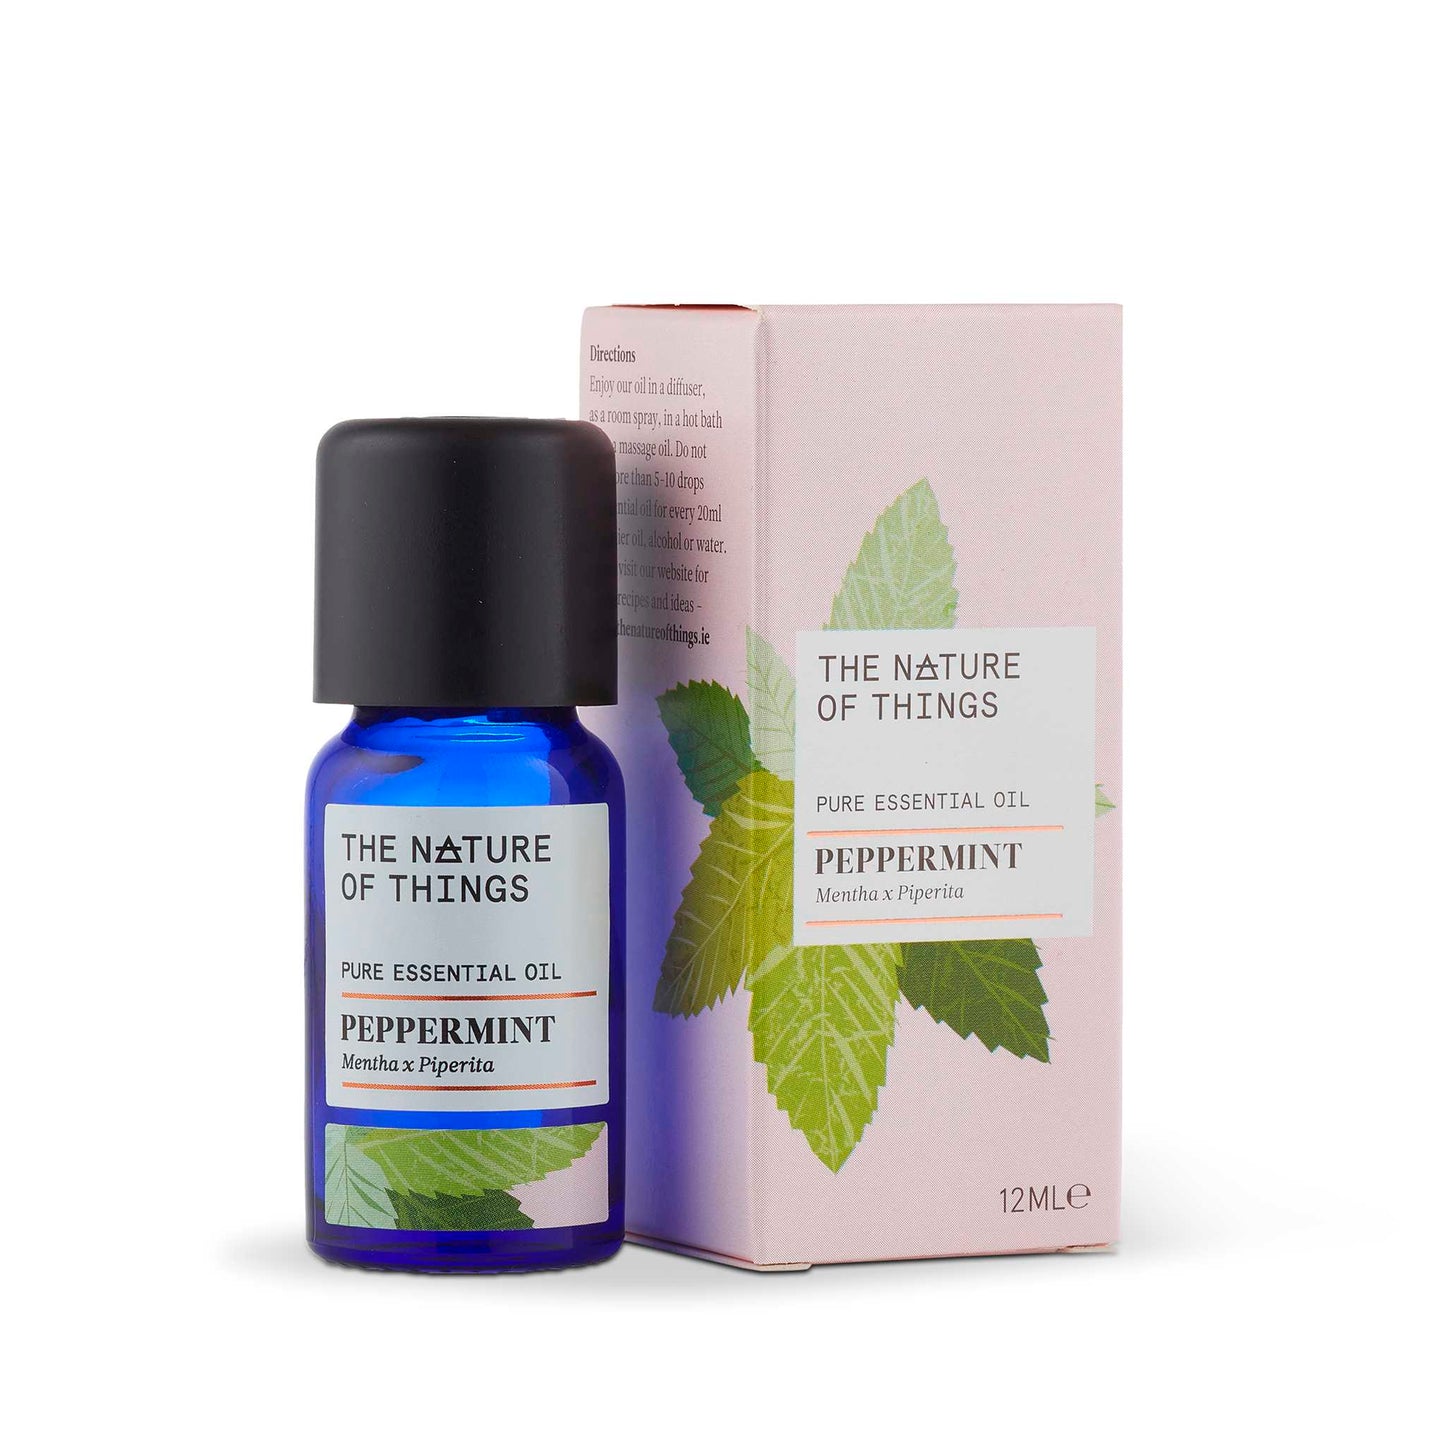 The Nature of Things Essential Oil Peppermint Essential Oil Organic 12ml - The Nature of Things